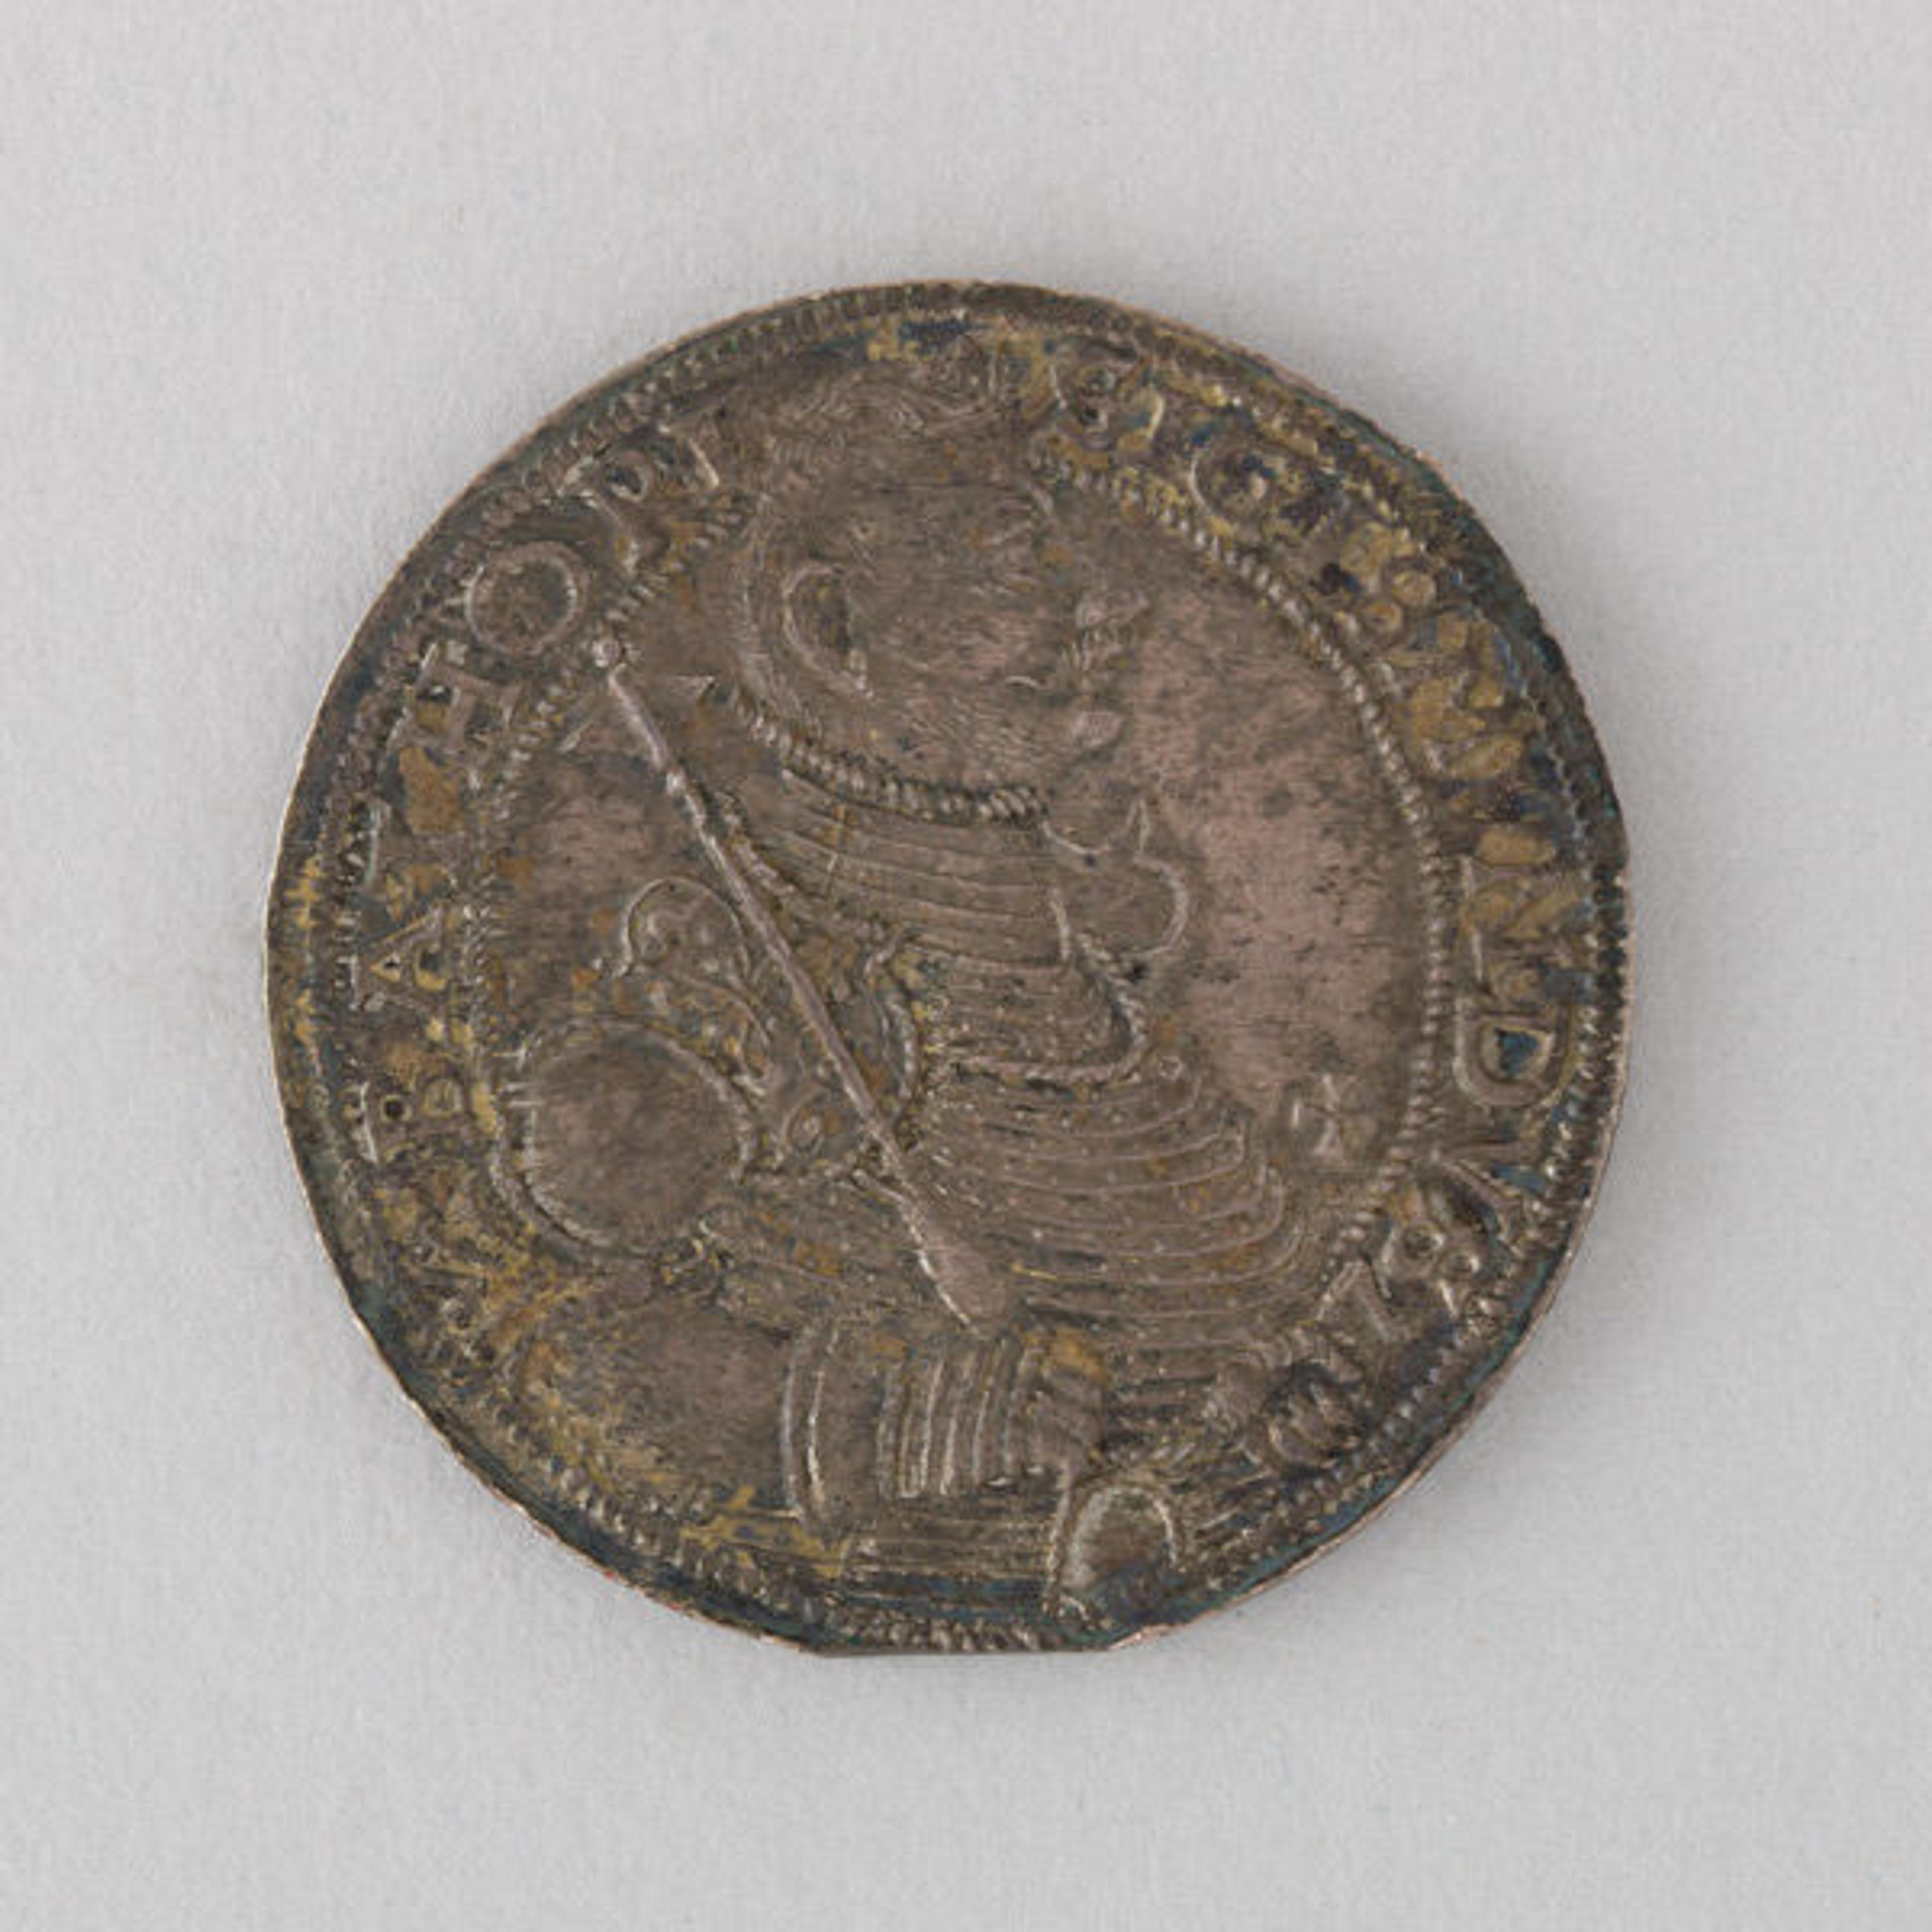 Coin (Thaler) Showing Prince Sigismund Báthori, 1593. Probably Hungarian. Silver; Diam. 1 5/8 in. (4.1 cm); thickness 1/8 in. (0.3 cm); Wt. 1.1 oz. (31.2 g). The Metropolitan Museum of Art, New York, Gift of Bashford Dean, 1922 (22.122.15)